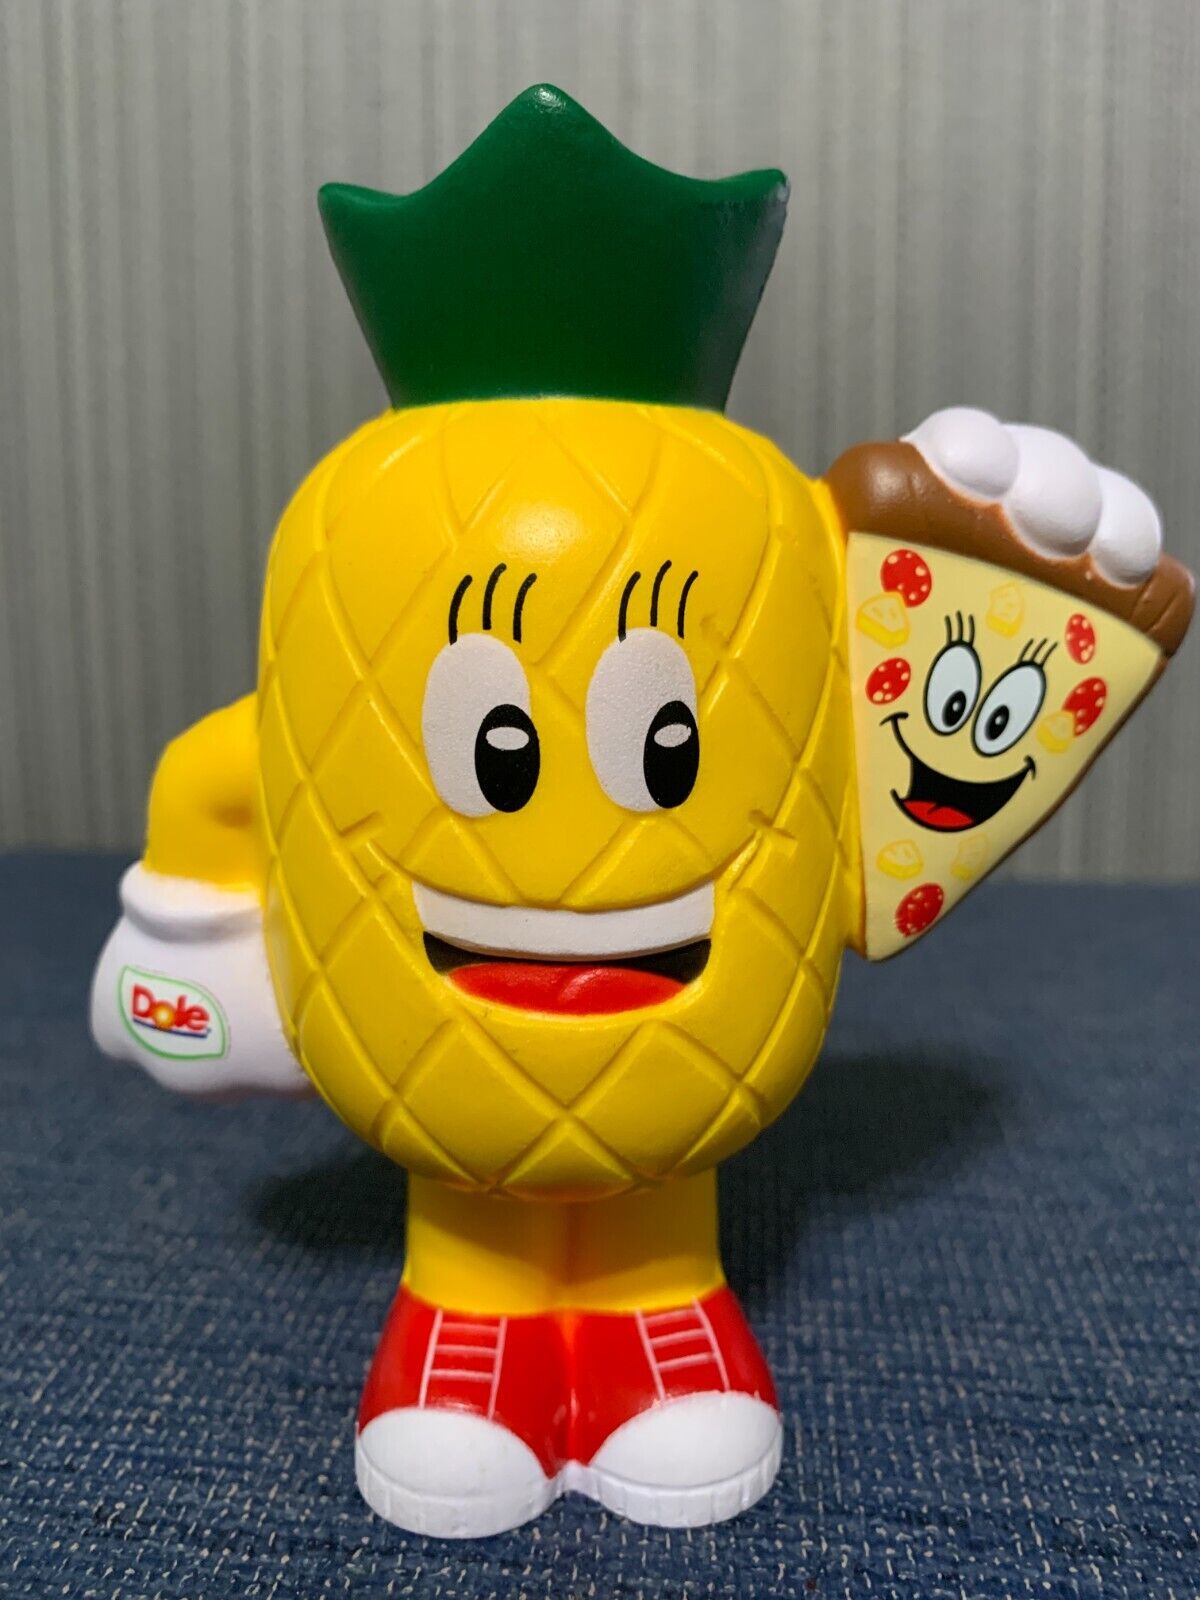 Dole Pineapple Pizza  Collectible Merch  Limited Edition Toy